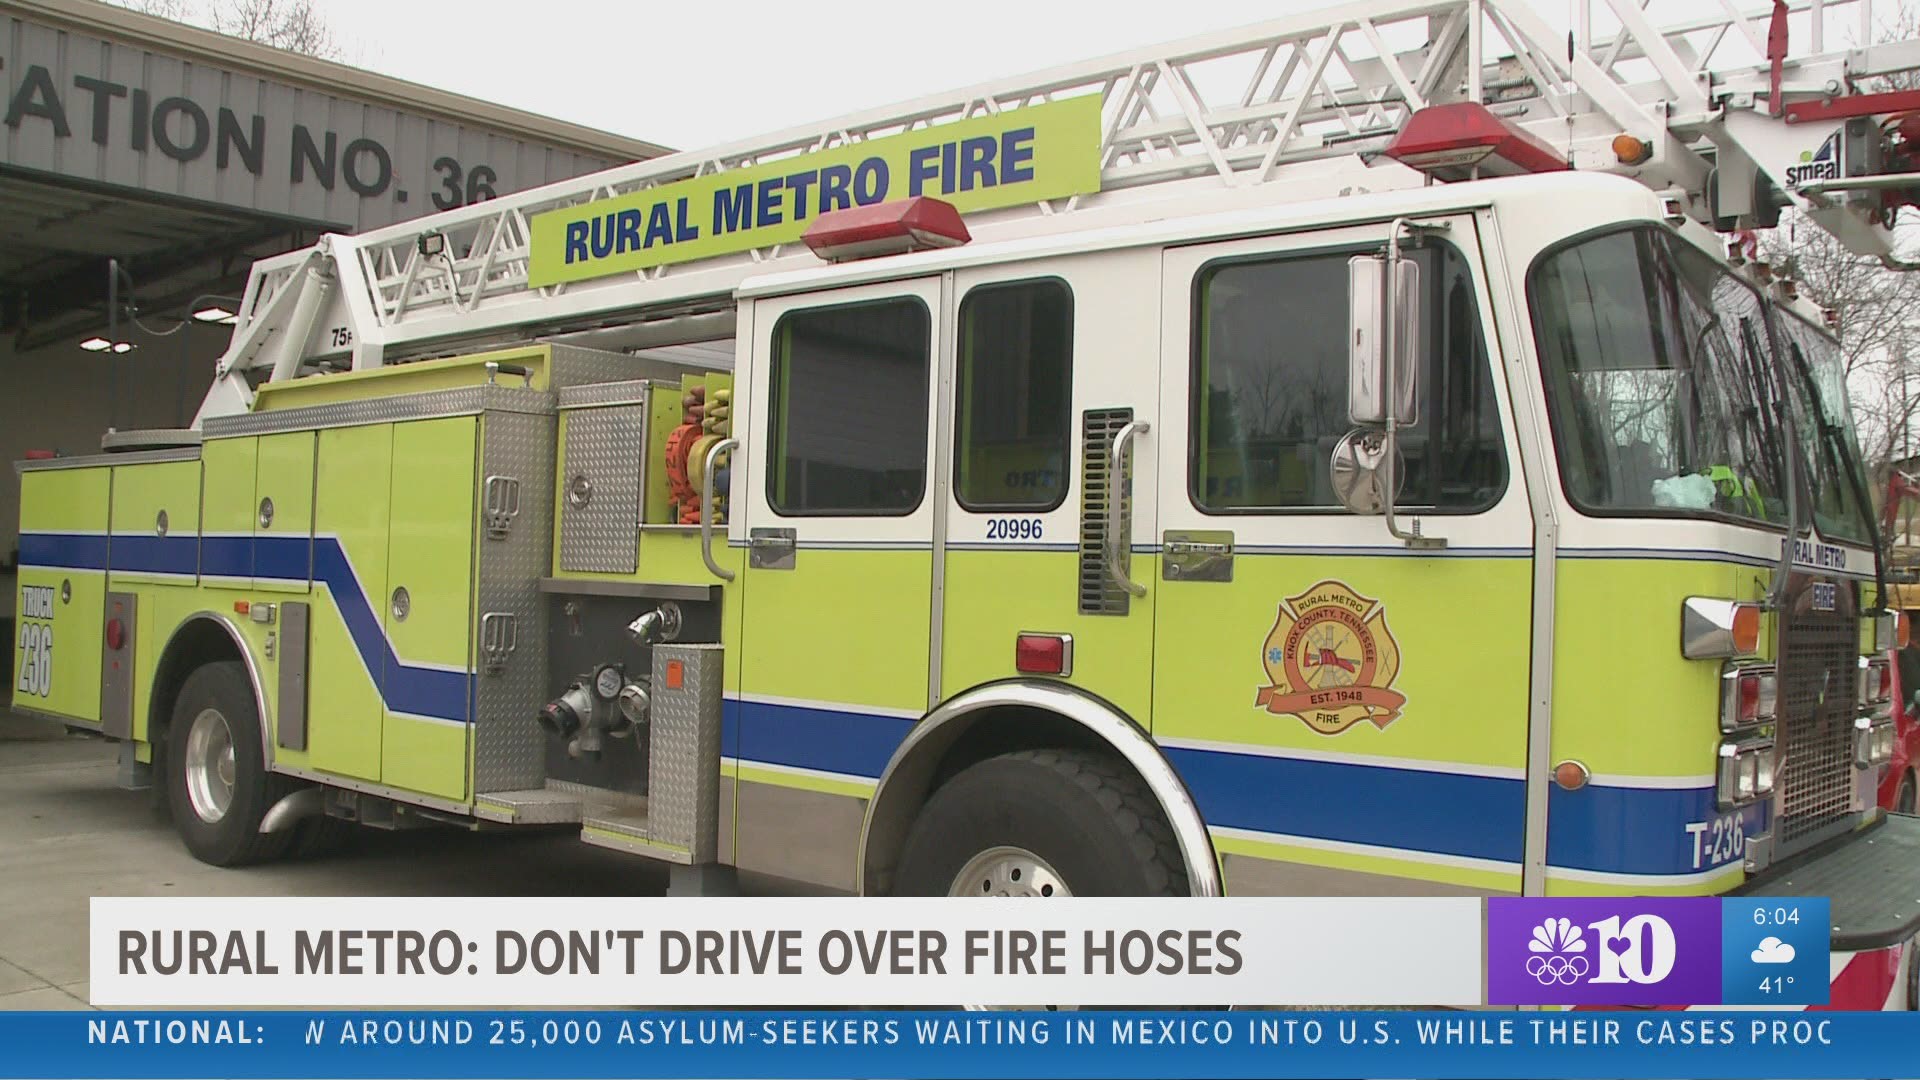 Rural Metro said a driver ran over and cut a hose attached to a hydrant.